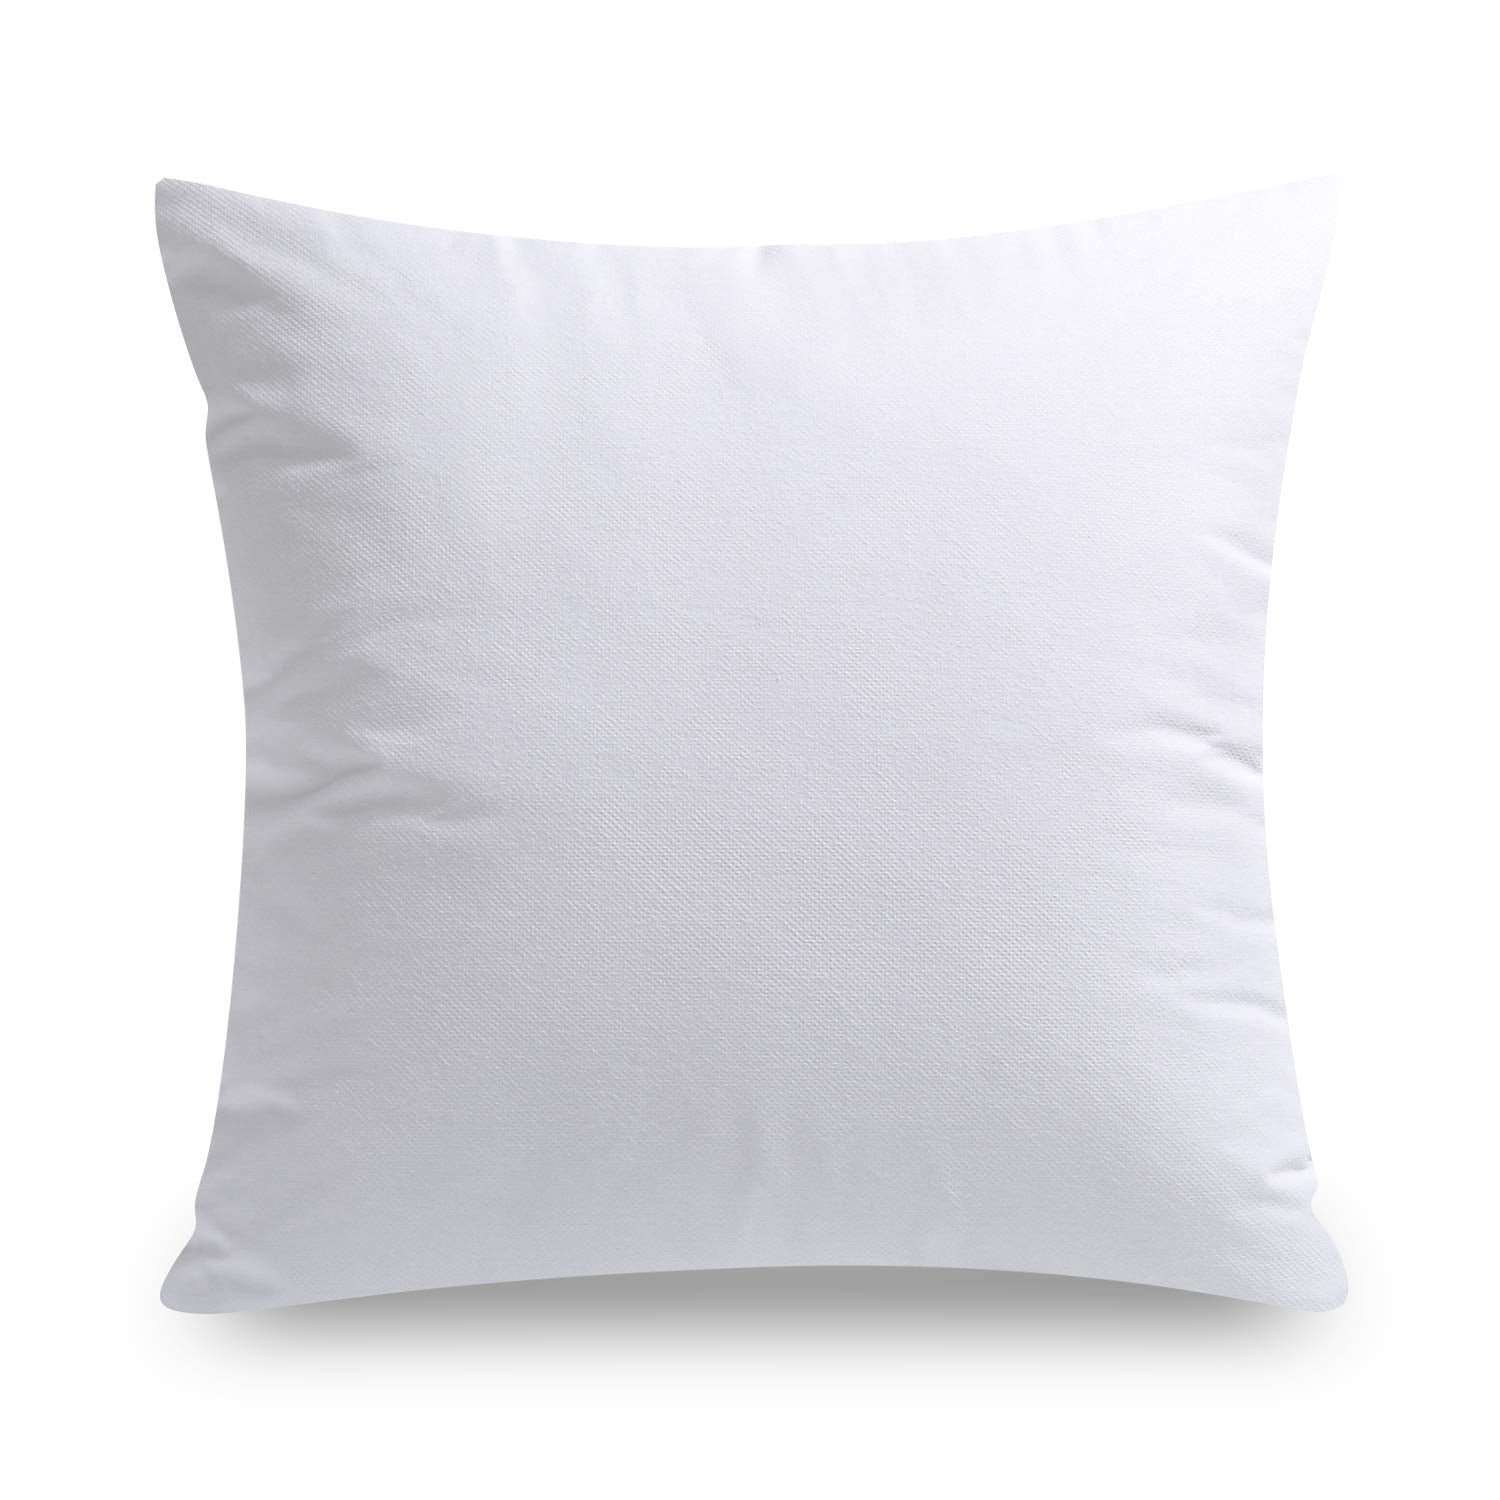 MoonRest 14x14 Inch Synthetic Down Alternative Square Pillow Insert Form  Stuffer for Sofa Shams, Decorative Throw Pillow, Cushion and Bed Pillow  stuffing - Hypoallergenic 14X 14 